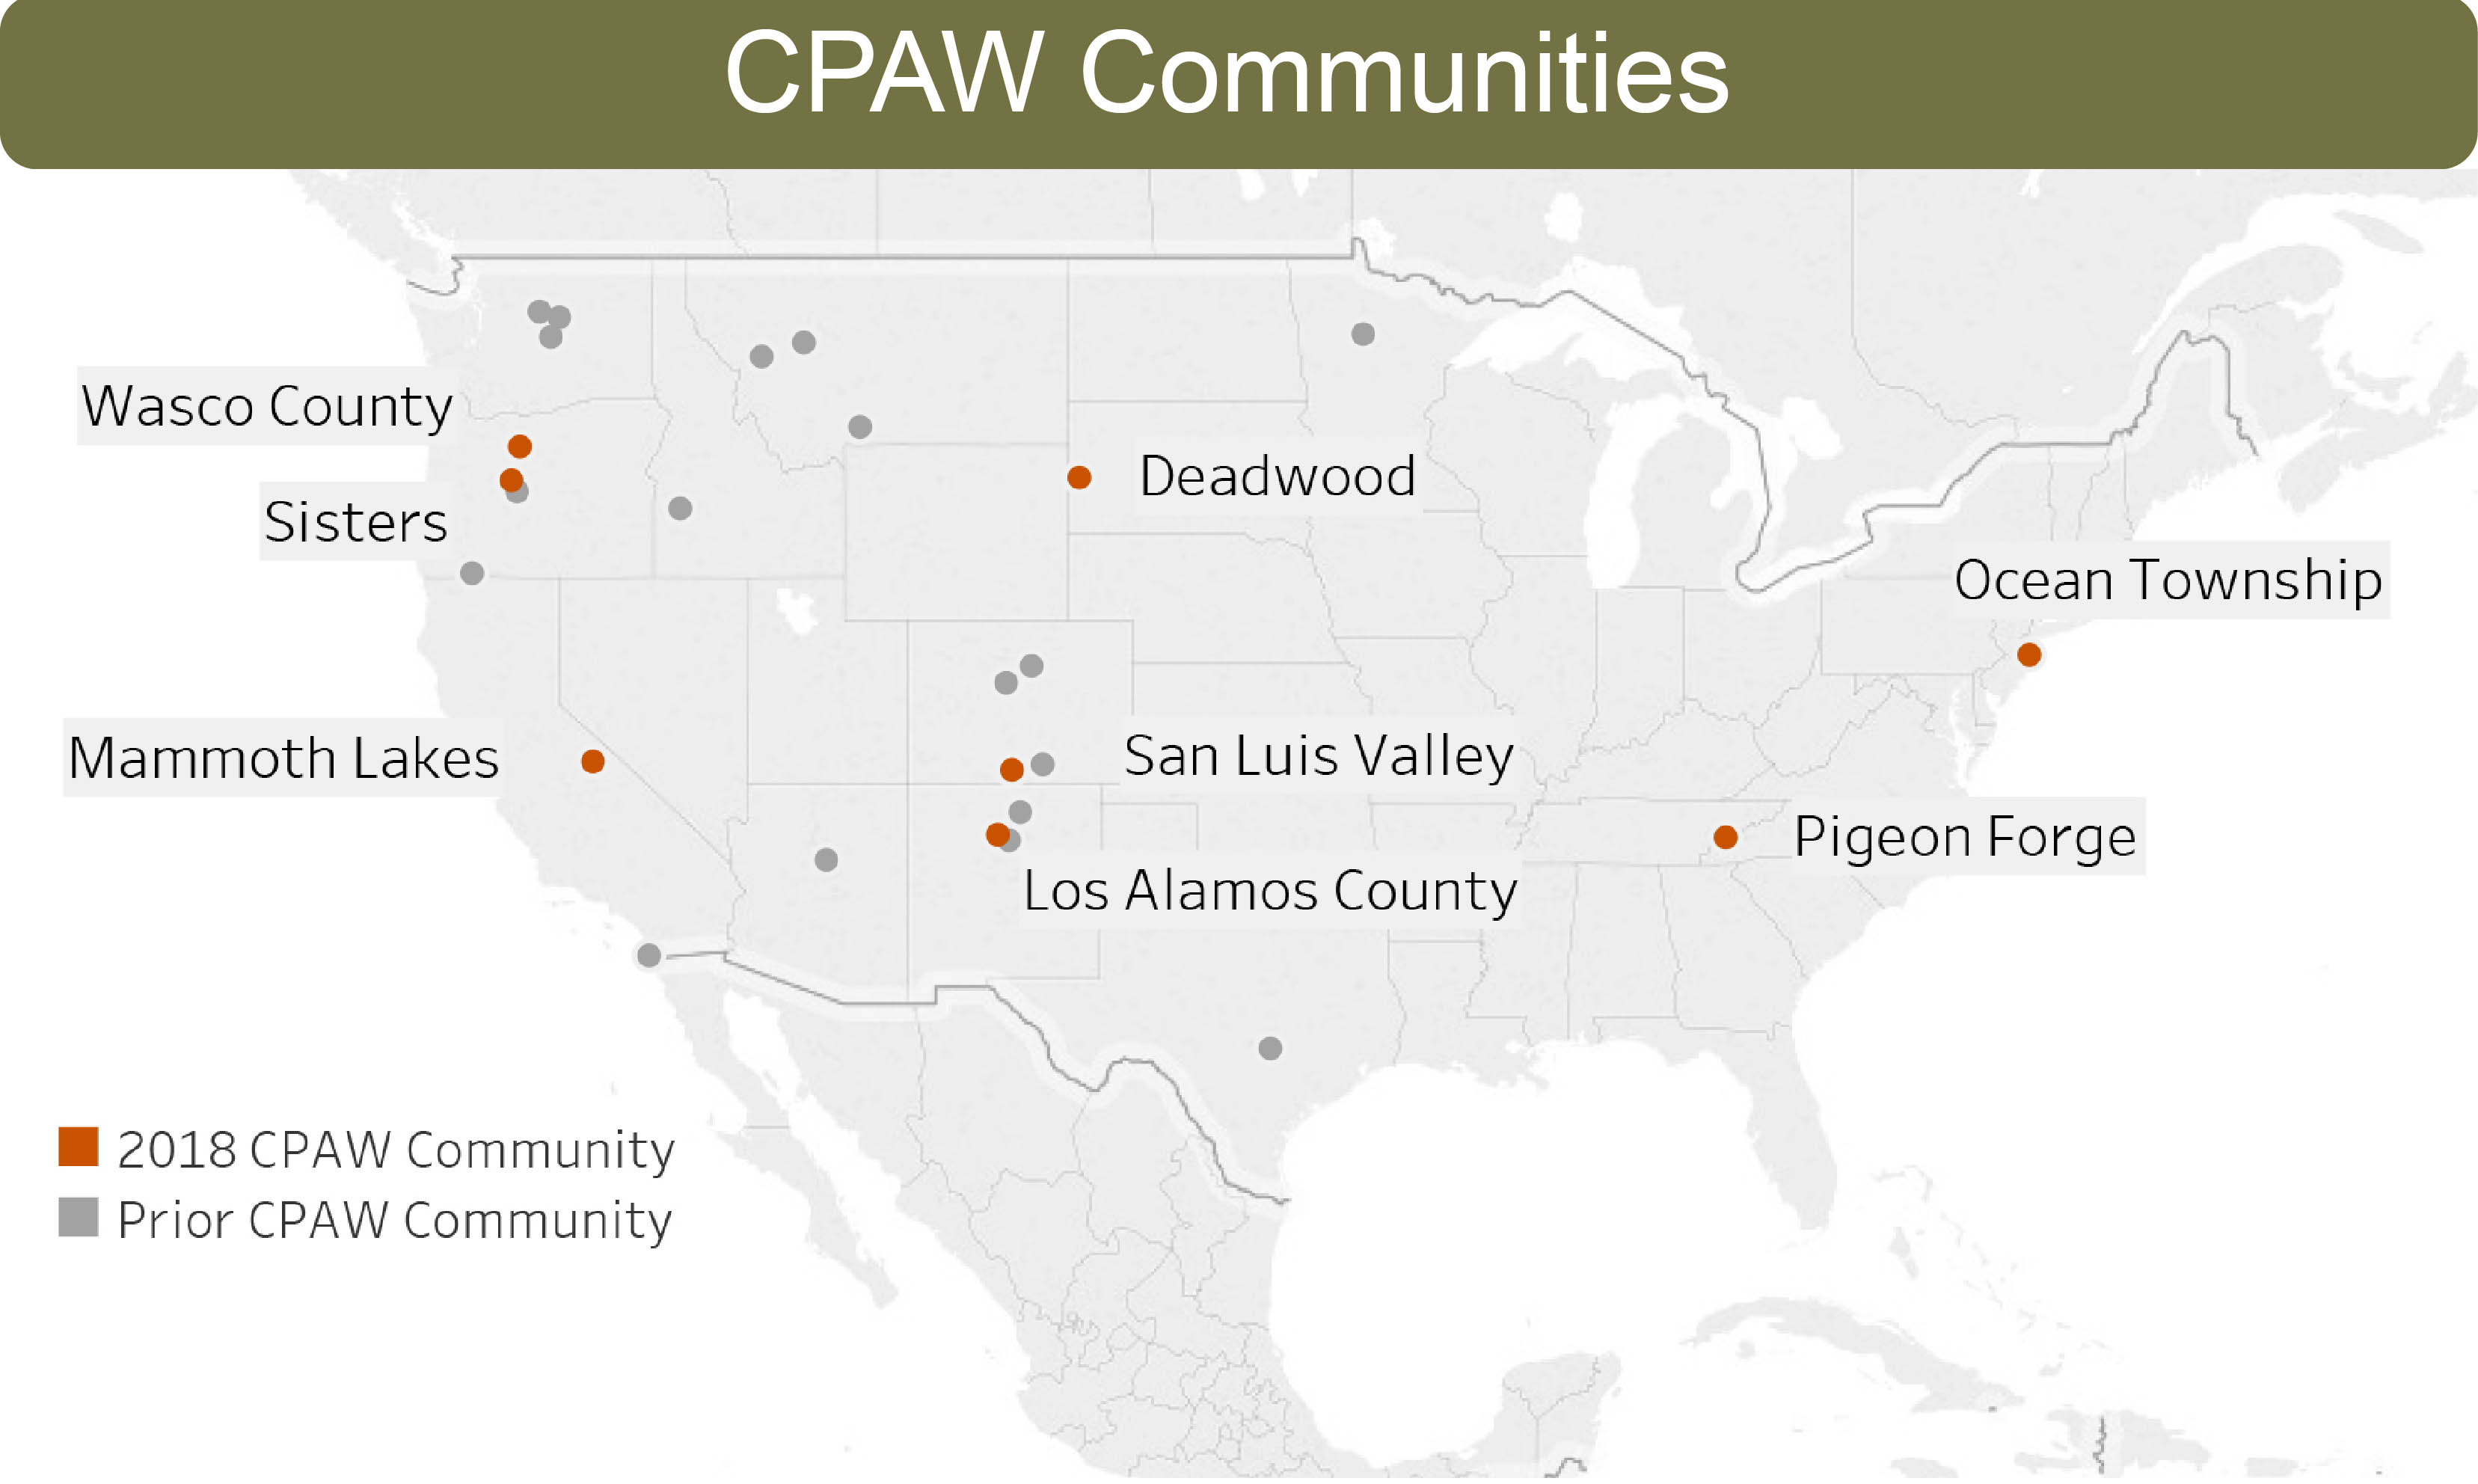 New CPAW Communities Announced